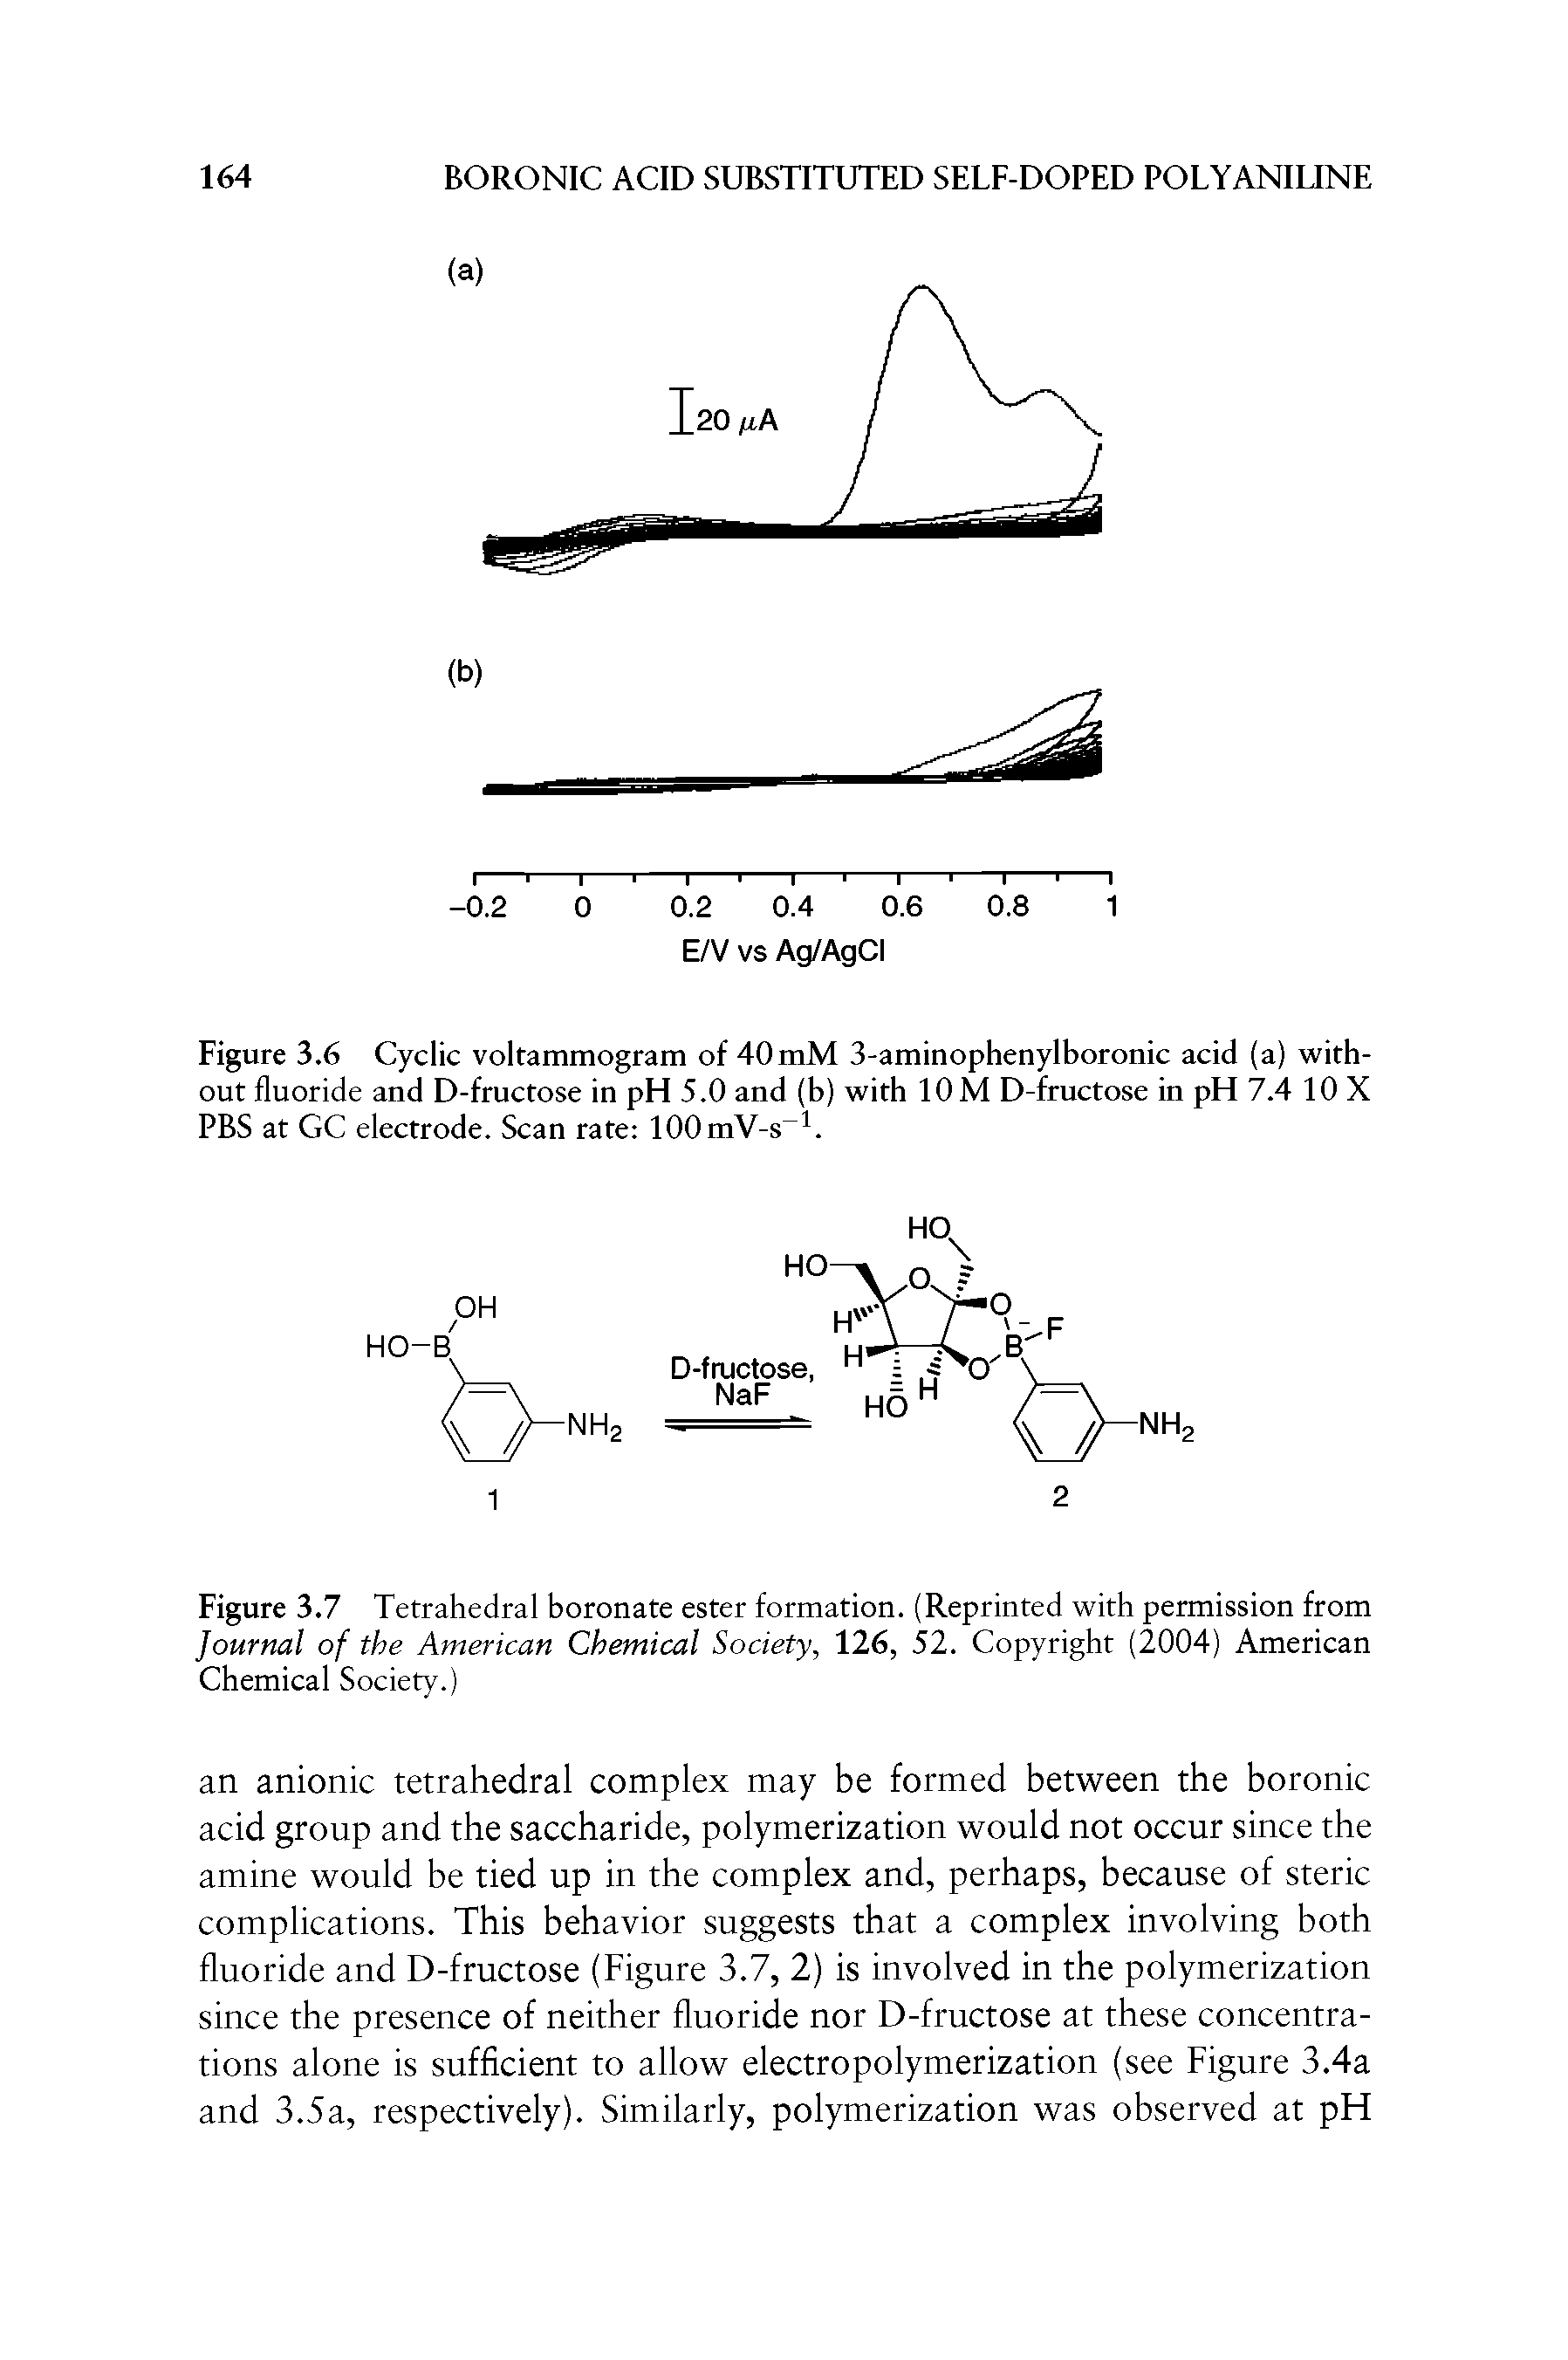 Figure 3.7 Tetrahedral boronate ester formation. (Reprinted with permission from Journal of the American Chemical Society, 126, 52. Copyright (2004) American Chemical Society.)...